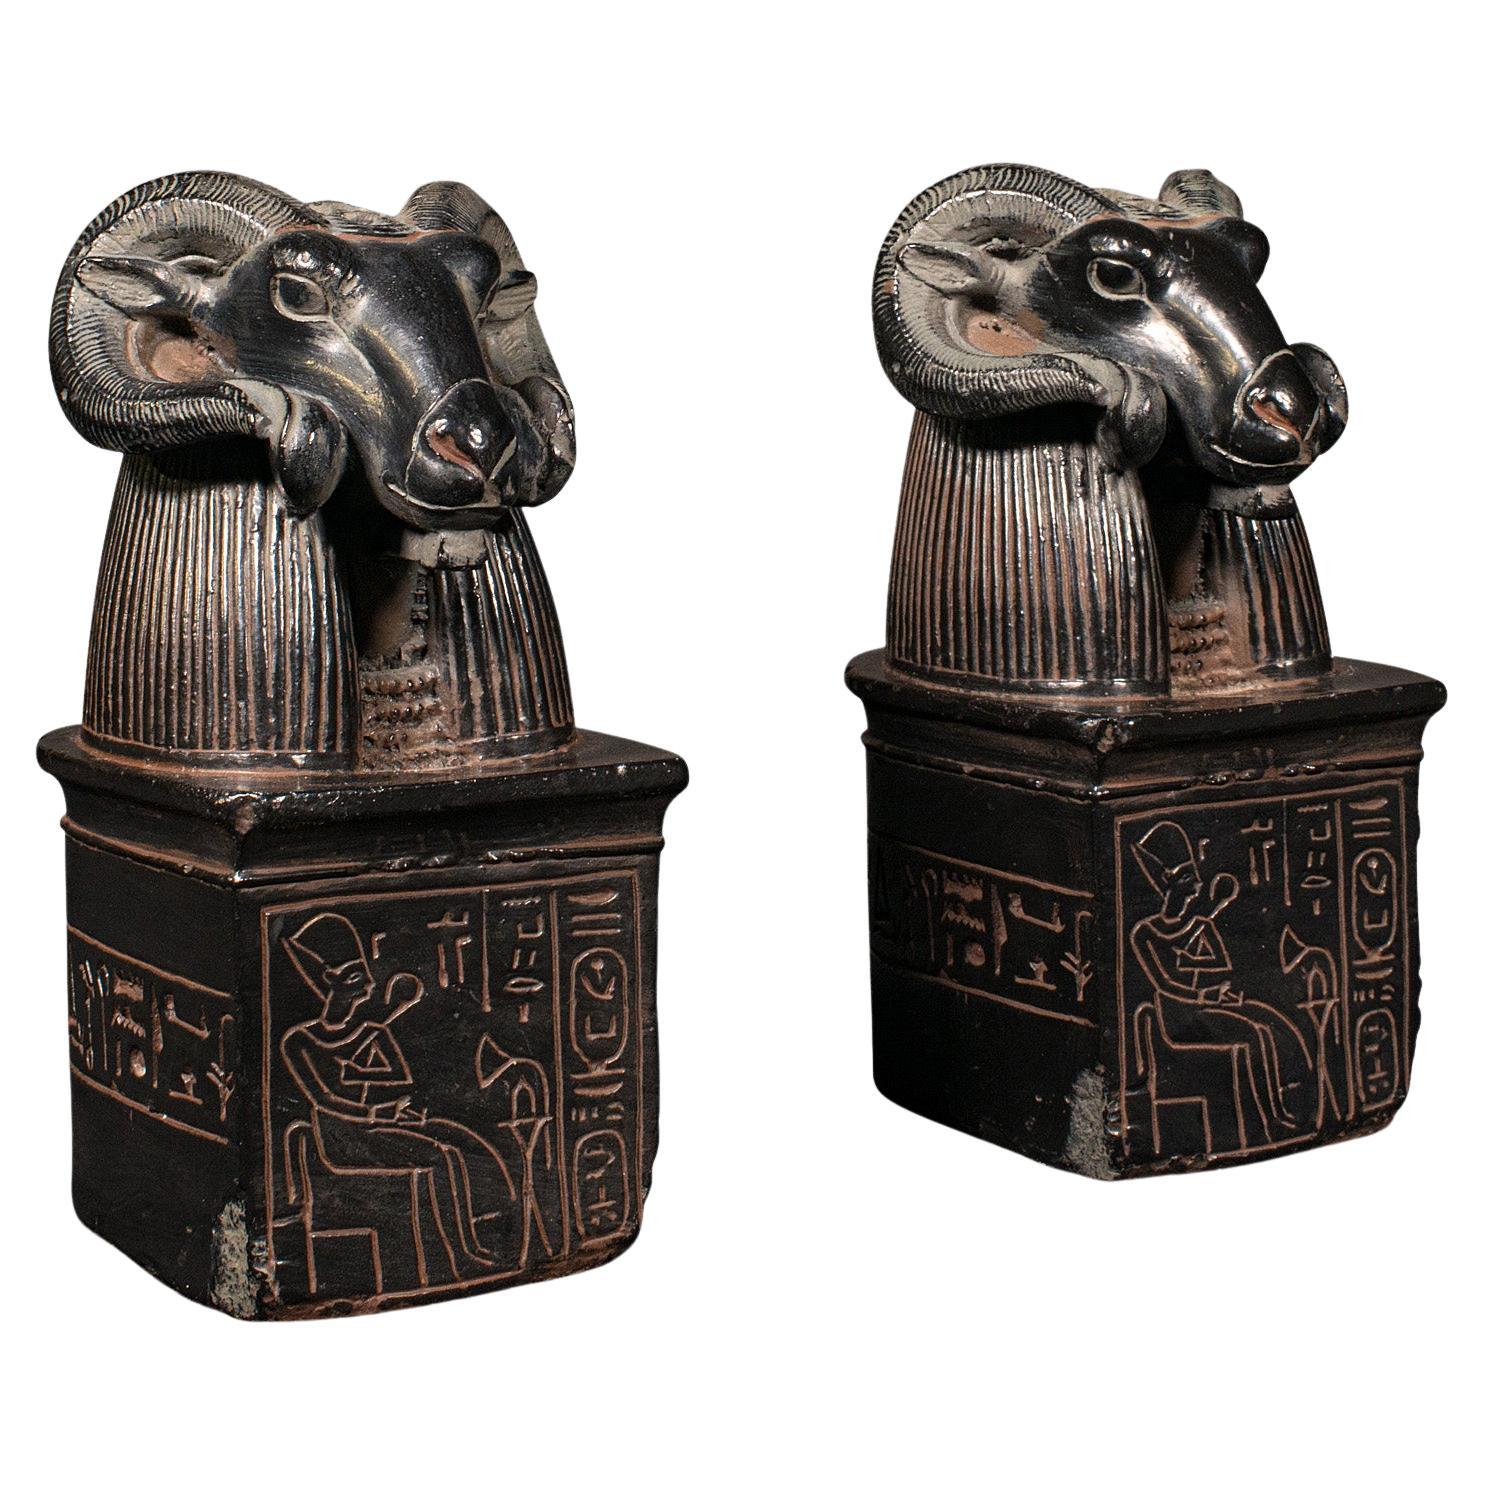 Pair of Vintage Amun Statuary Bookends, Egyptian, Decorative Book Rest, Historic